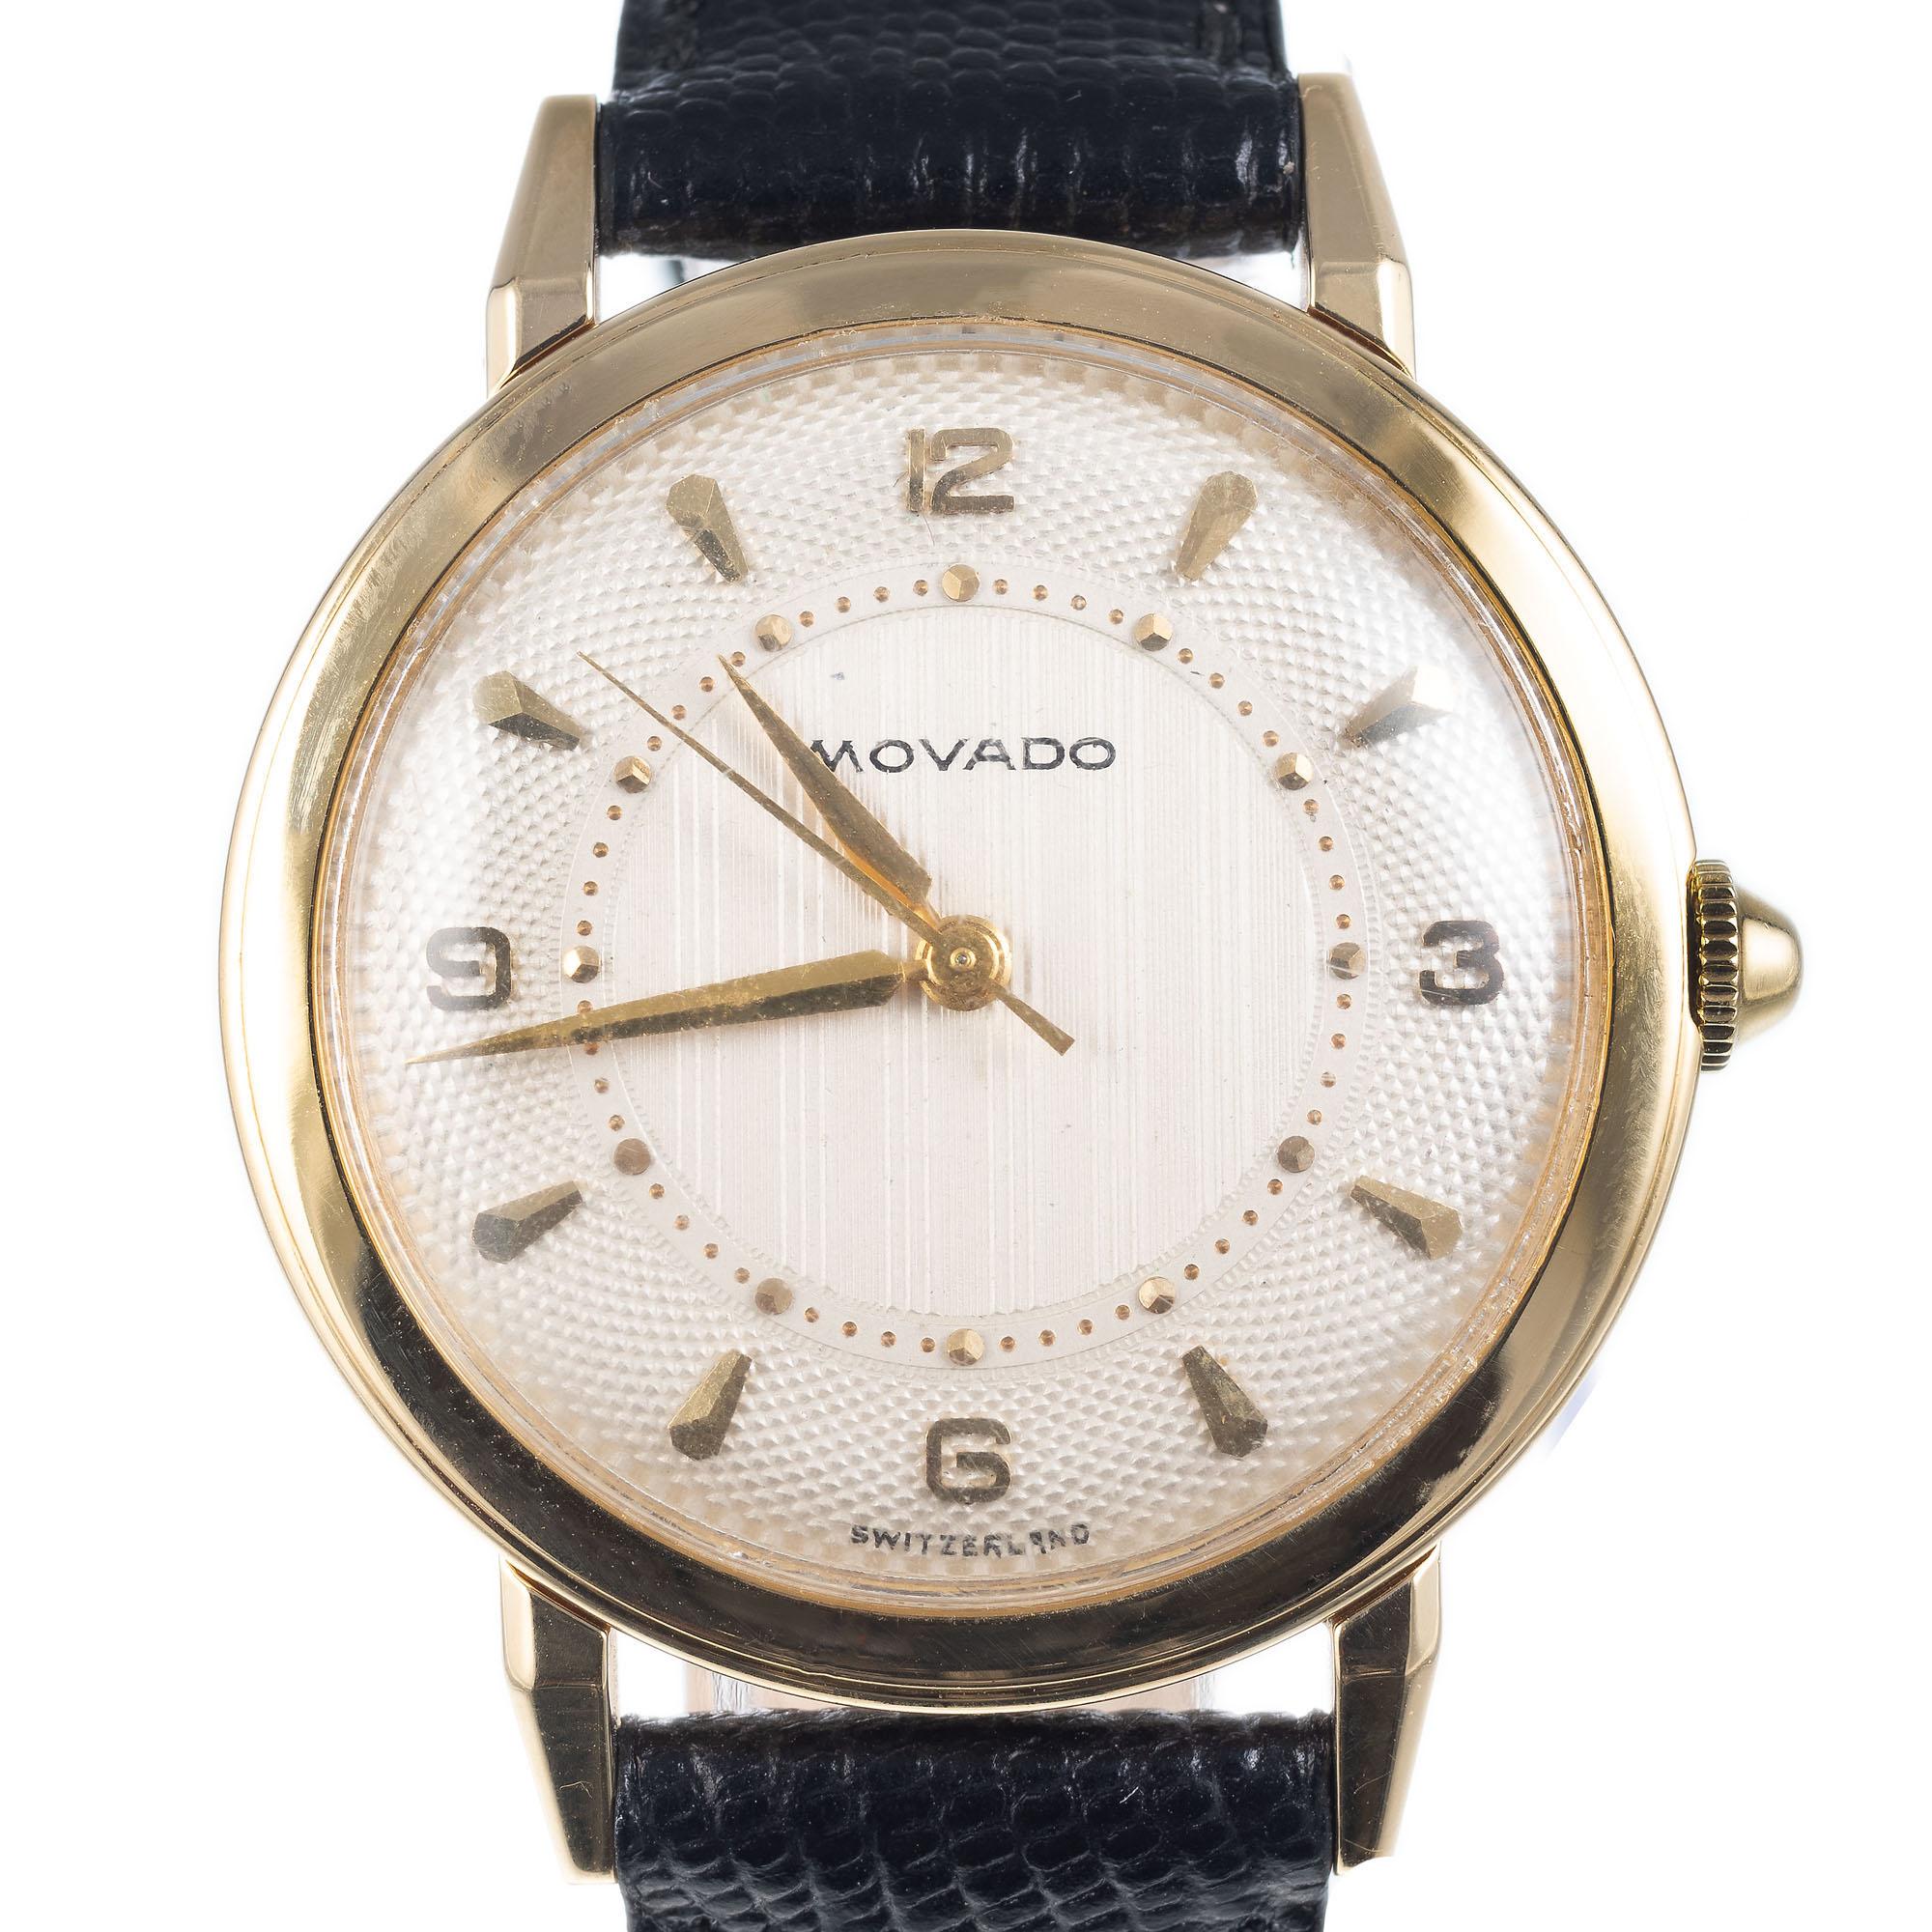 Movado 18k yellow gold strap wristwatch with cream colored factory original textured dial. New black leather strap.  Circa 1960.

Length: 41.06mm
Width: 33nn
Band width at case: 16mm
Case thickness: 9.32mm
Band: Black genuine leather New
Crystal: